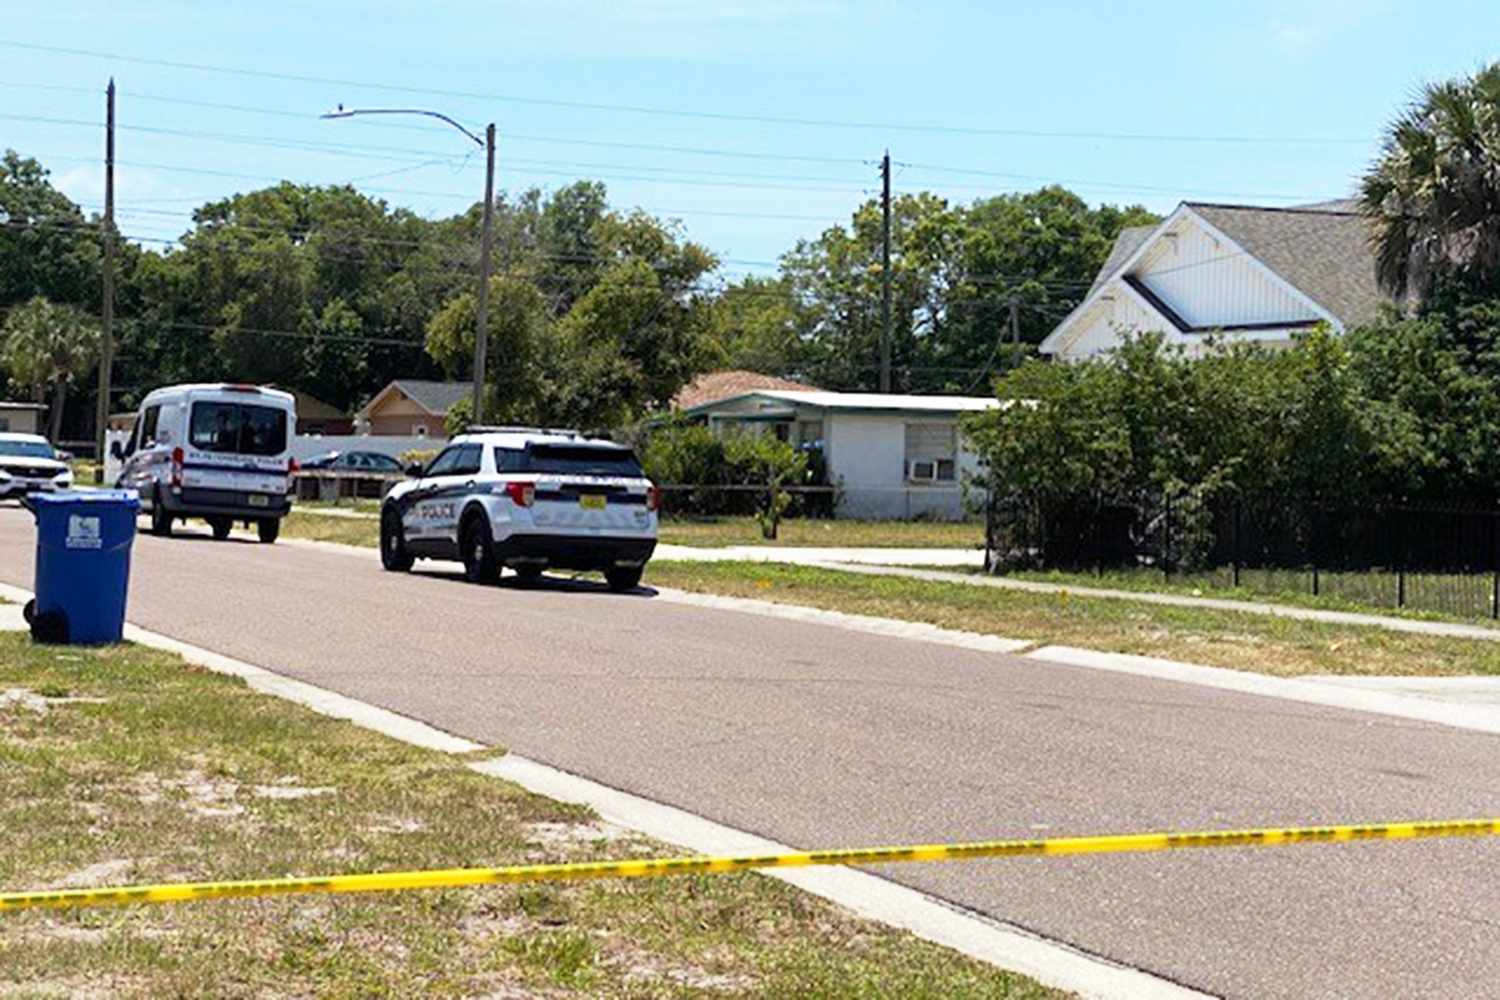 14-Year-Old Boy Accidentally Fatally Shoots 11-Year-Old Brother: 'He Had So Much Potential'